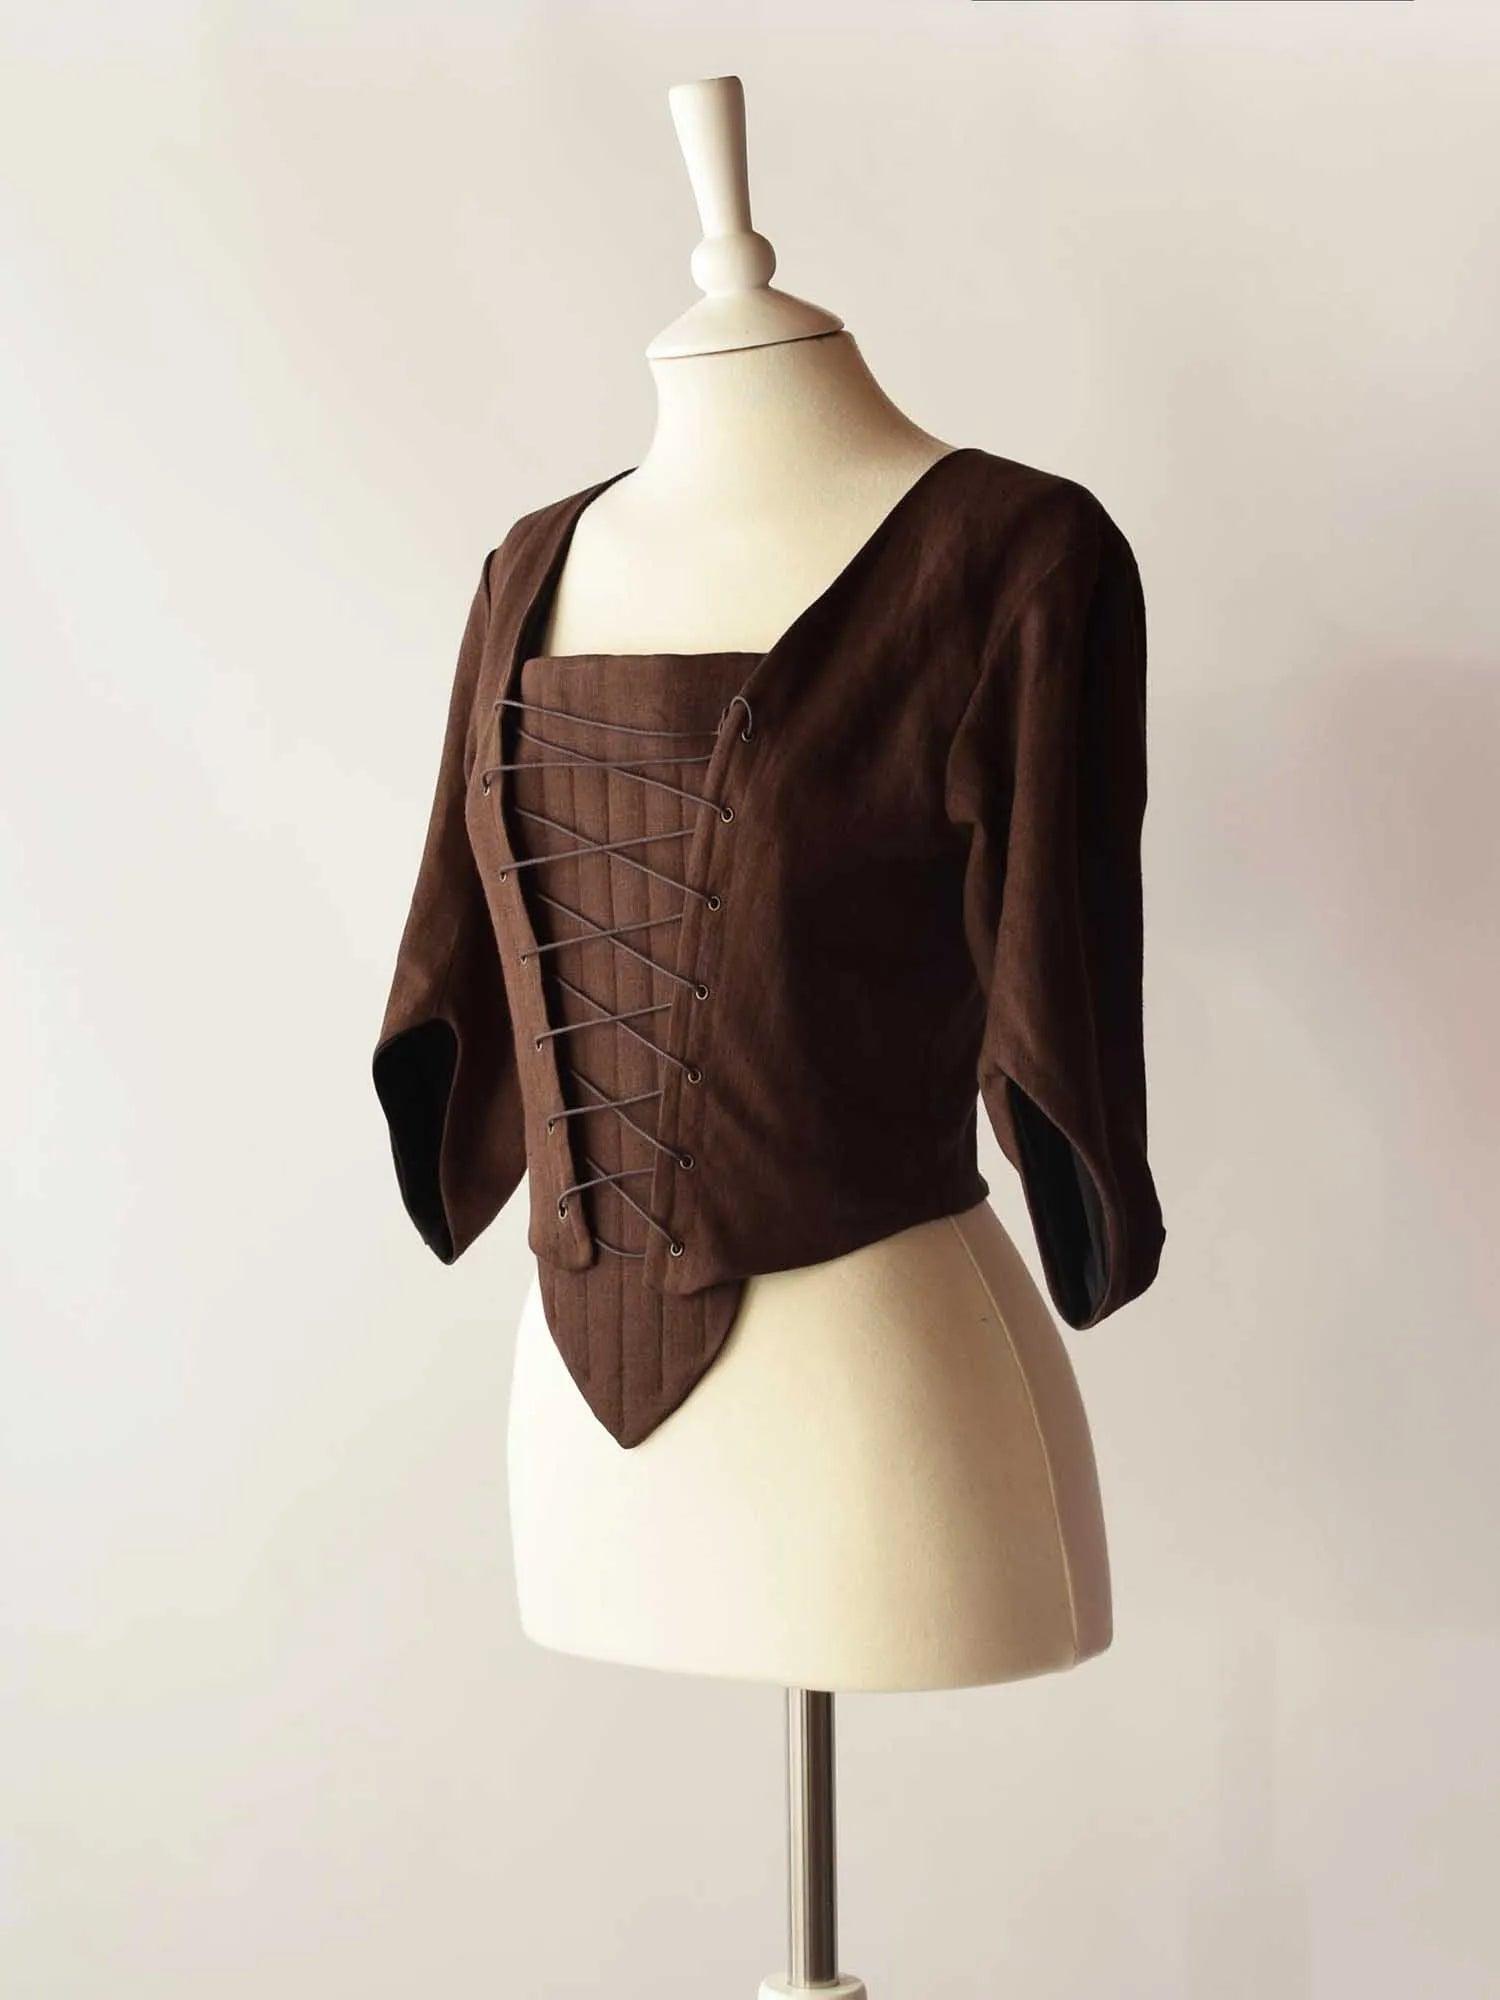 Lace Up Bodice in Chocolate Linen - Atelier Serraspina